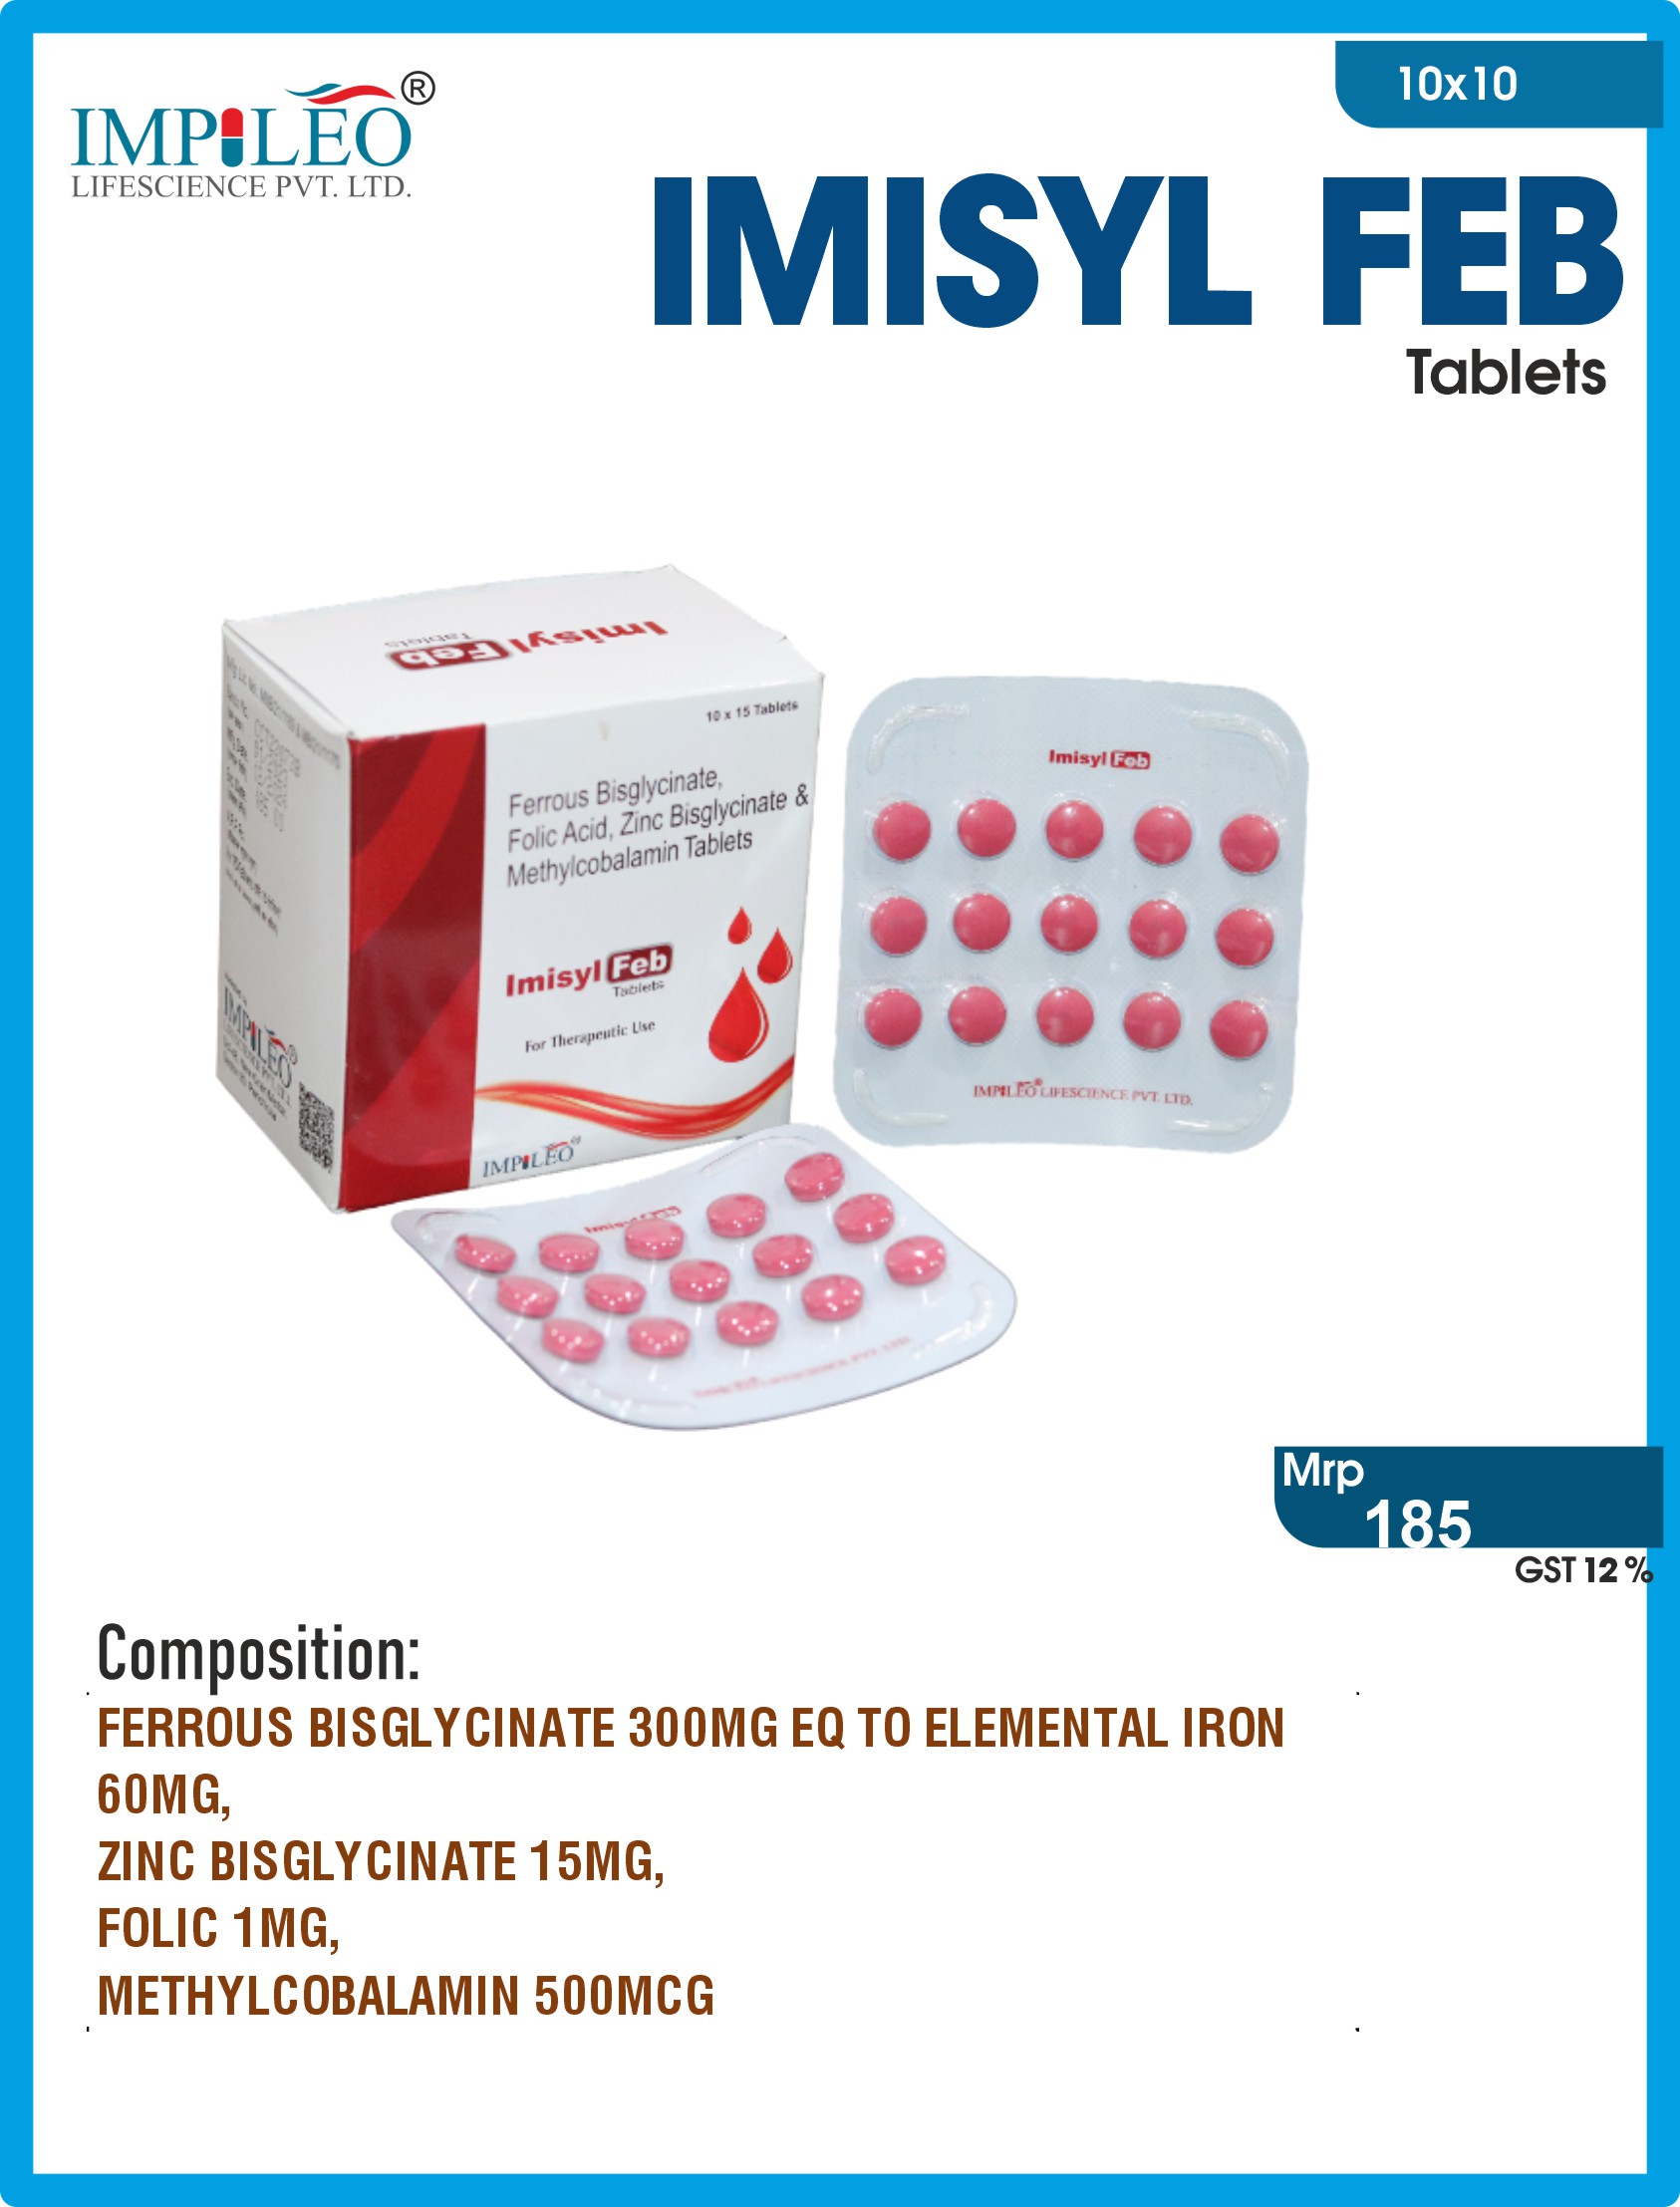 Experience Quality Care : IMISYL FEB Tablets (Ferrous Bisglycinate + Zinc Bisglycinate + Folic Acid + Methylcobalamin) Offered by Prime PCD Pharma Franchise in Chandigarh